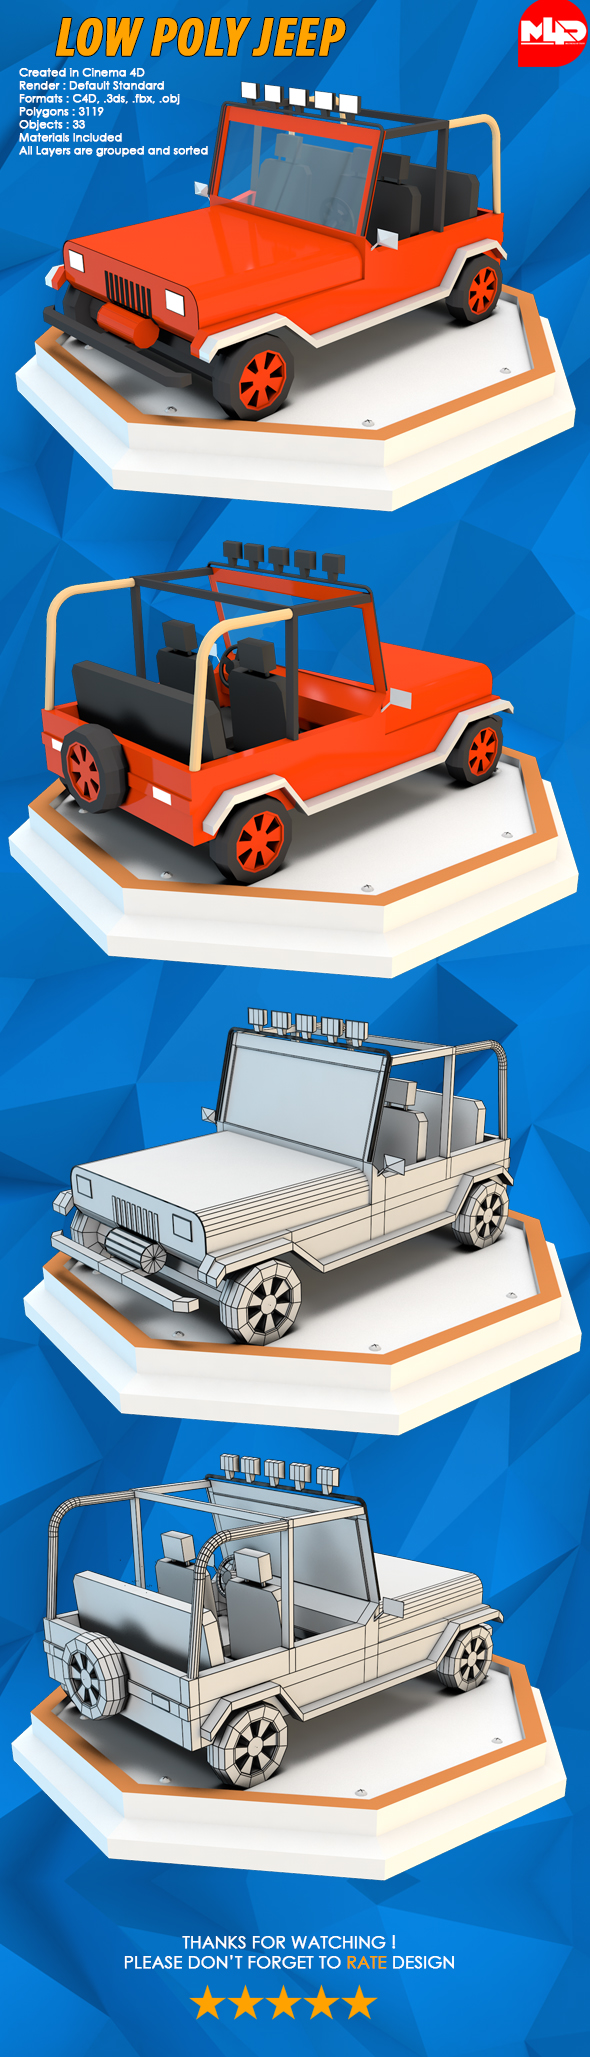 Low Poly Jeep - 3Docean 19685951